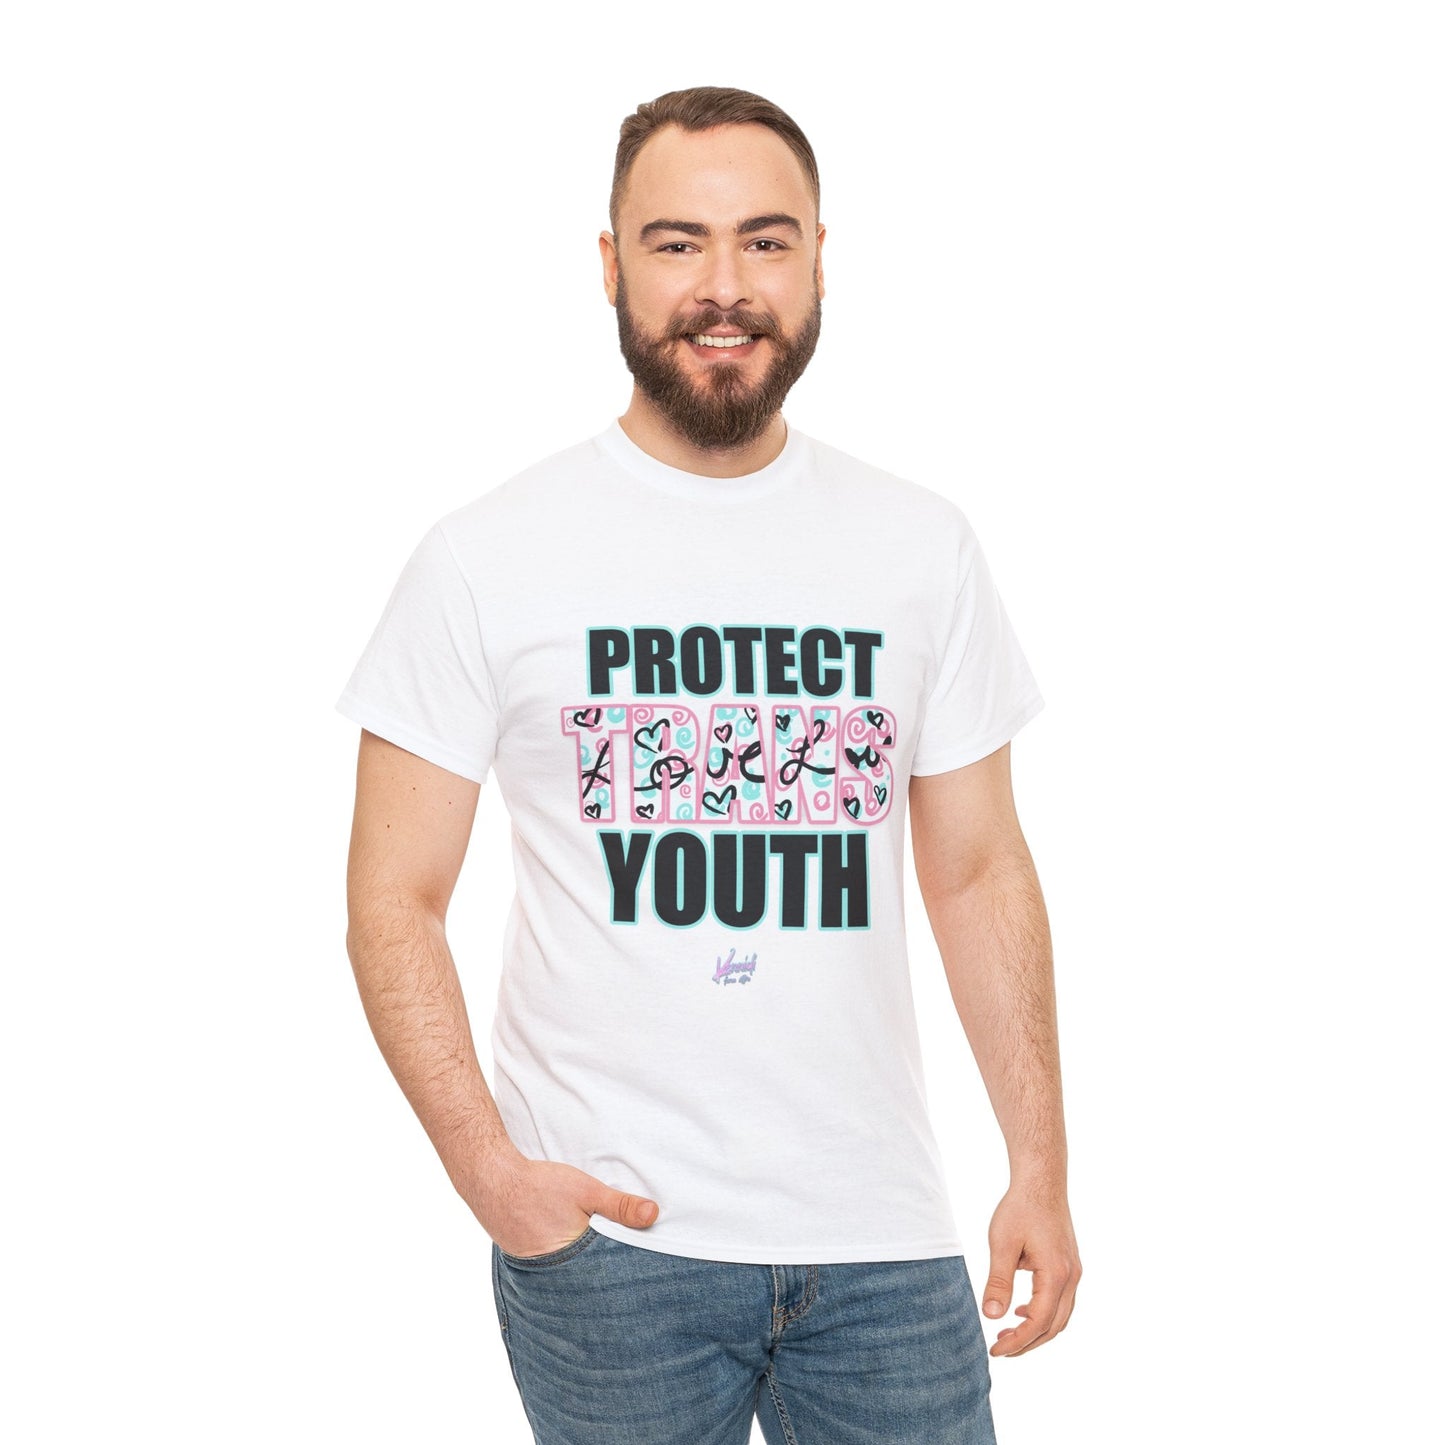 Protect Trans Youth Love 3.0 Unisex Heavy Cotton Tee - White / S T - Shirt